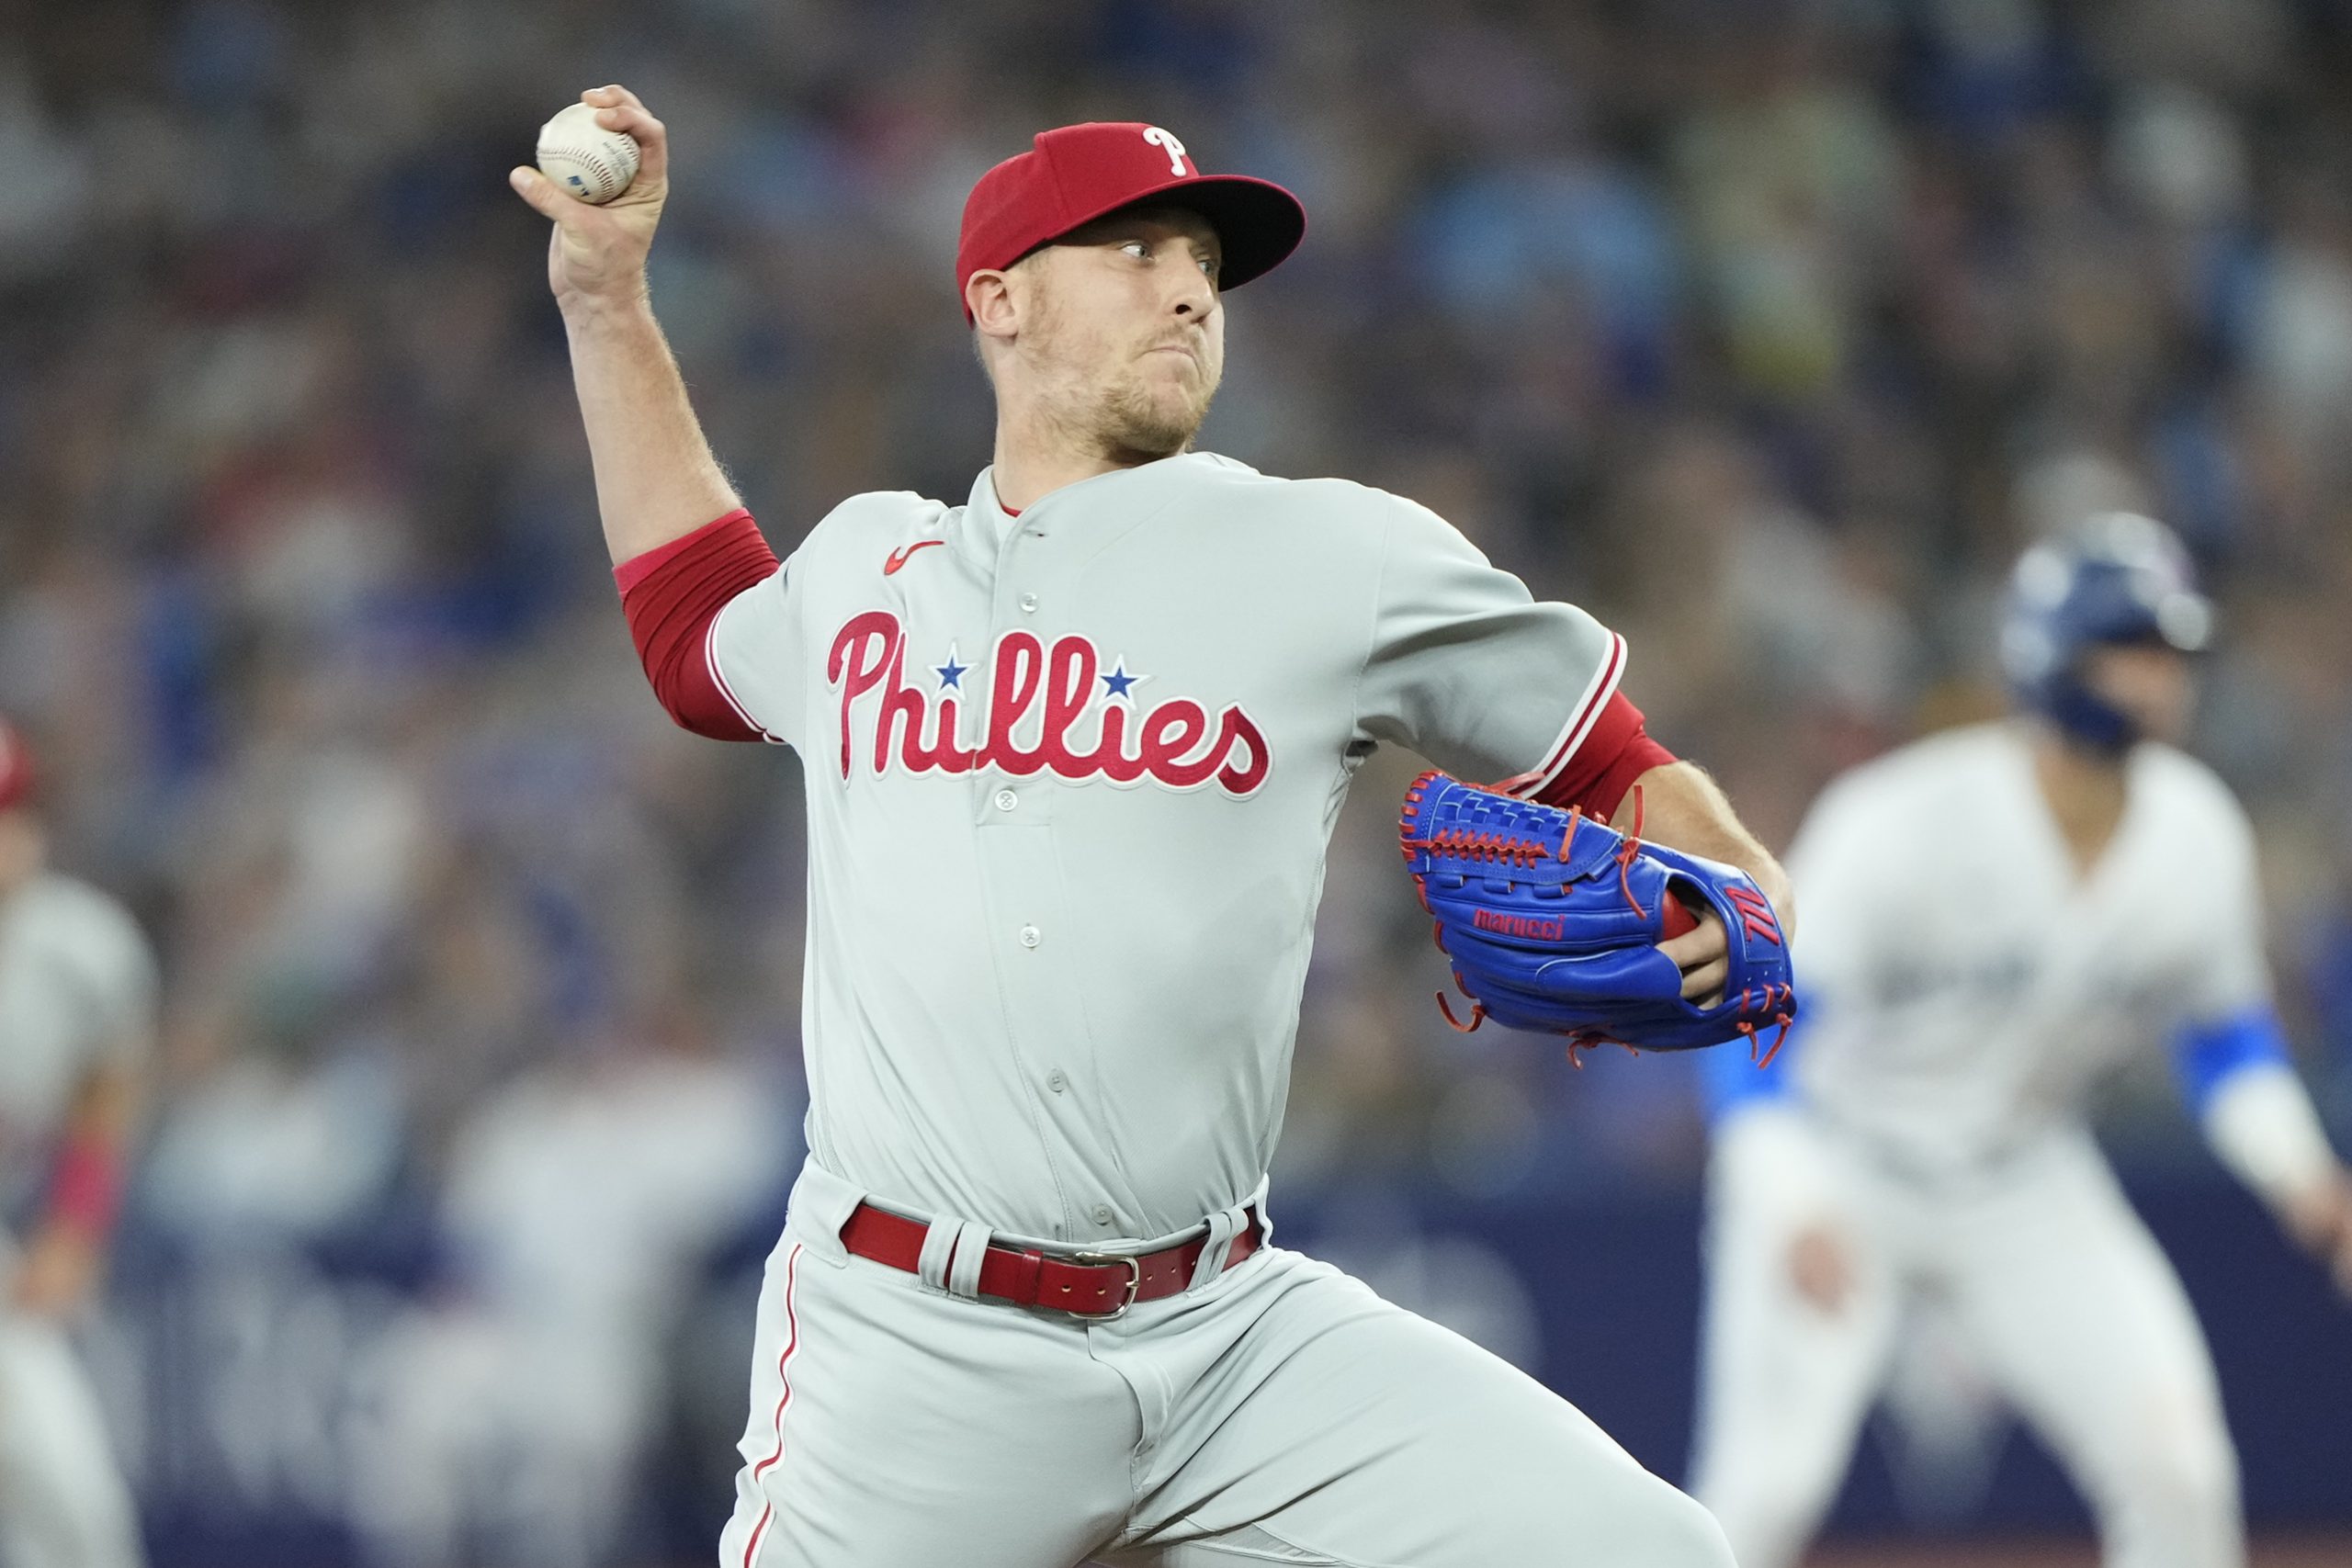 Stats of the Series: Phillies sweep Reds, by Philadelphia Phillies